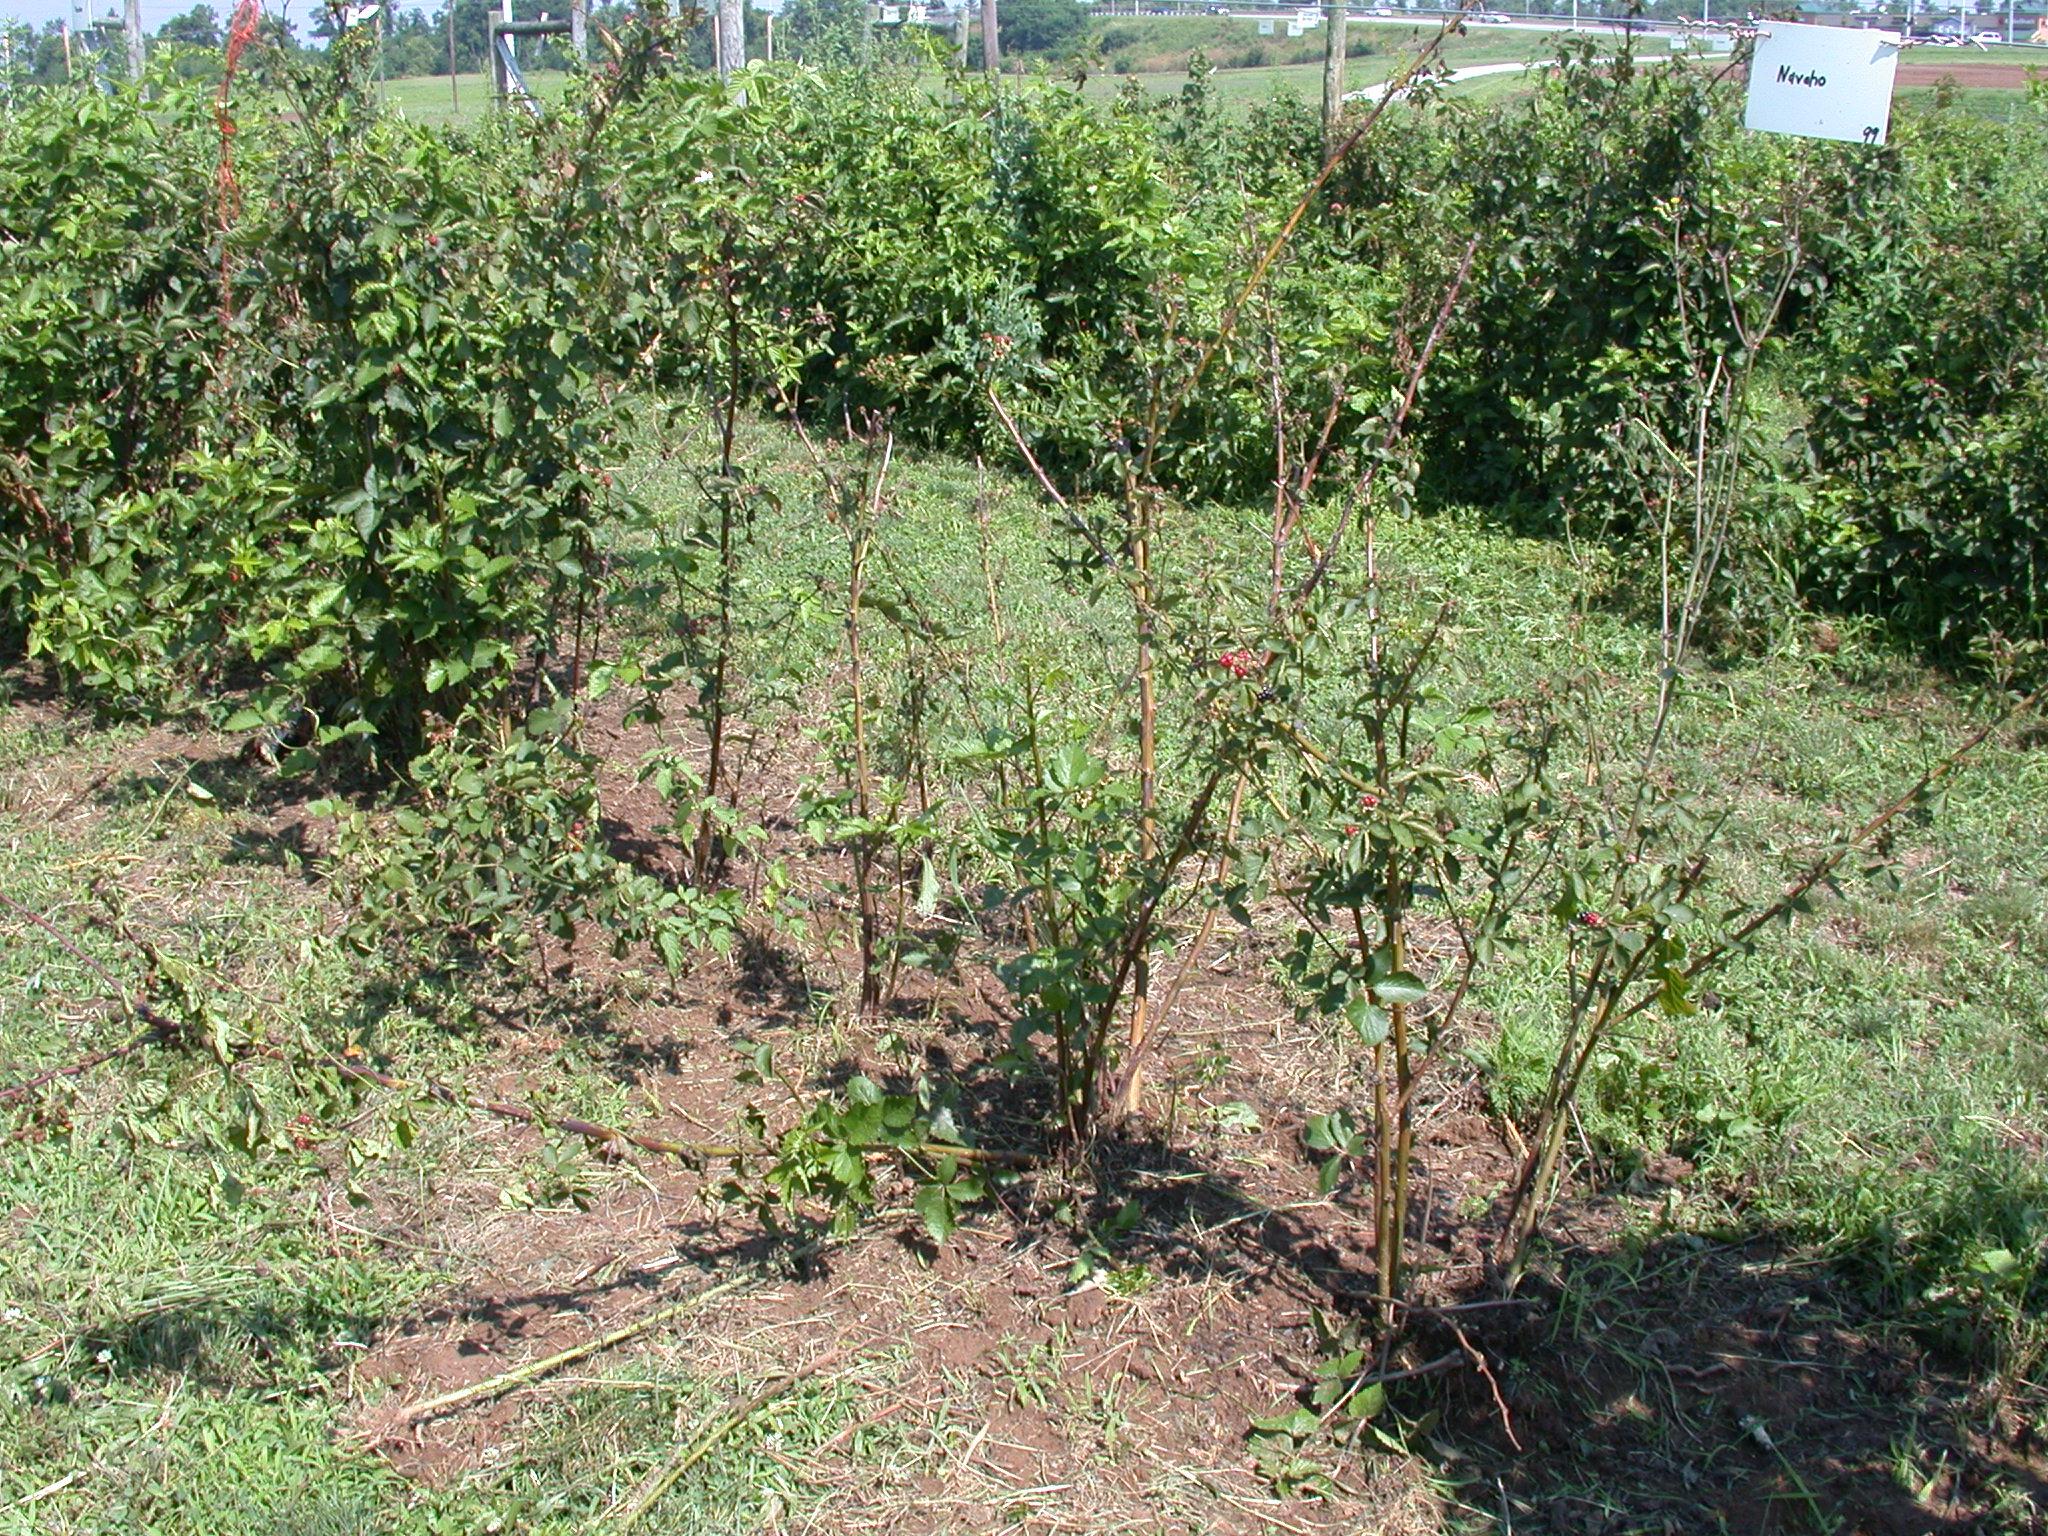 Weakened canes with poor growth due to raspberry crown borer. 